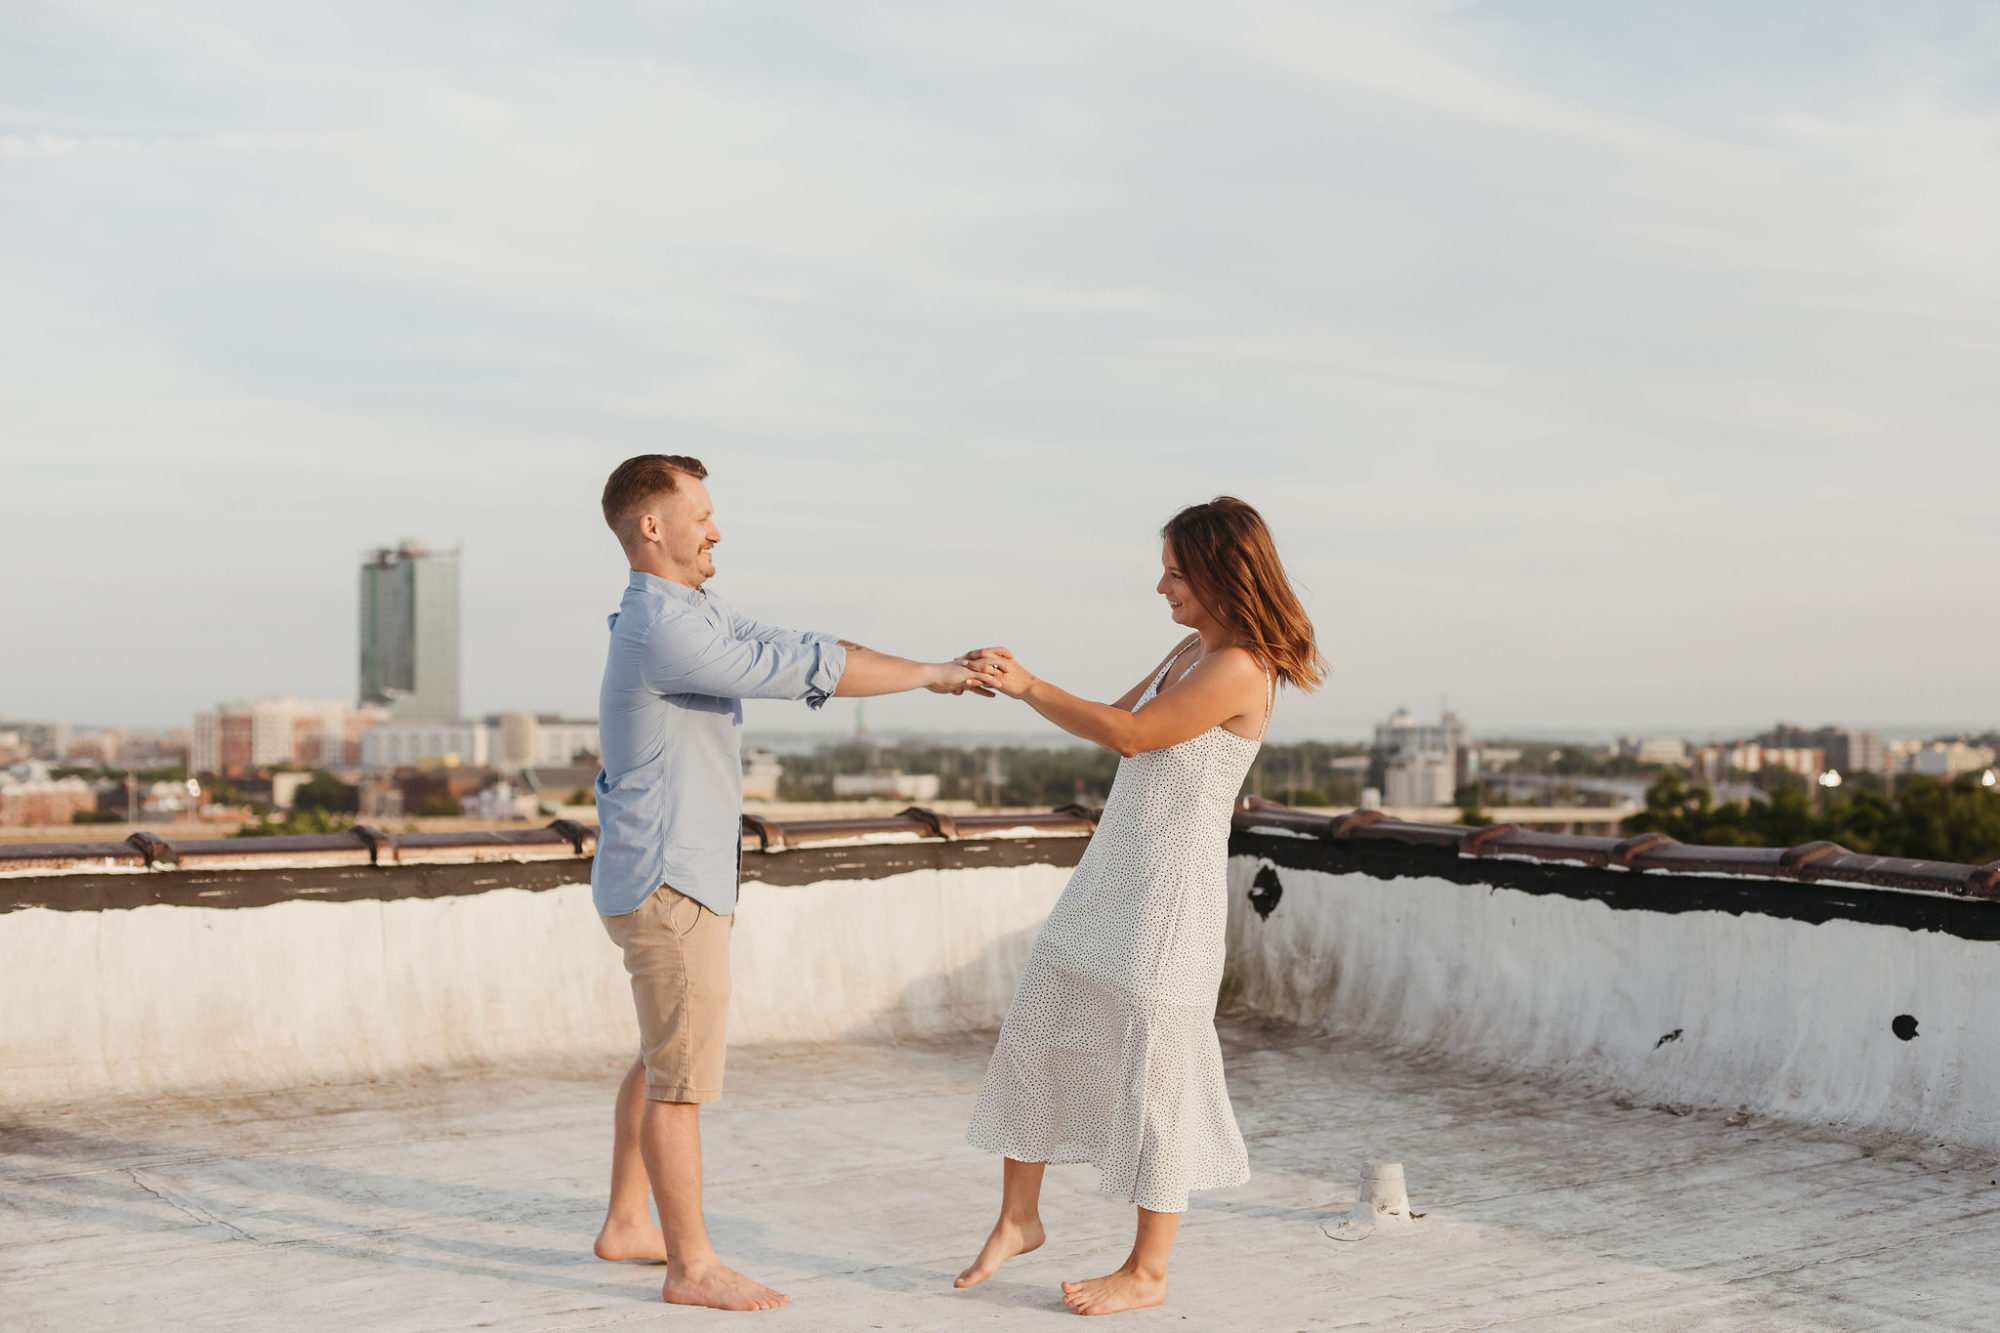 urban, city engagement shoot, rooftop photos, dog engagement pictures, casual couple photos, hudson valley, troy new york, hudson valley photographer